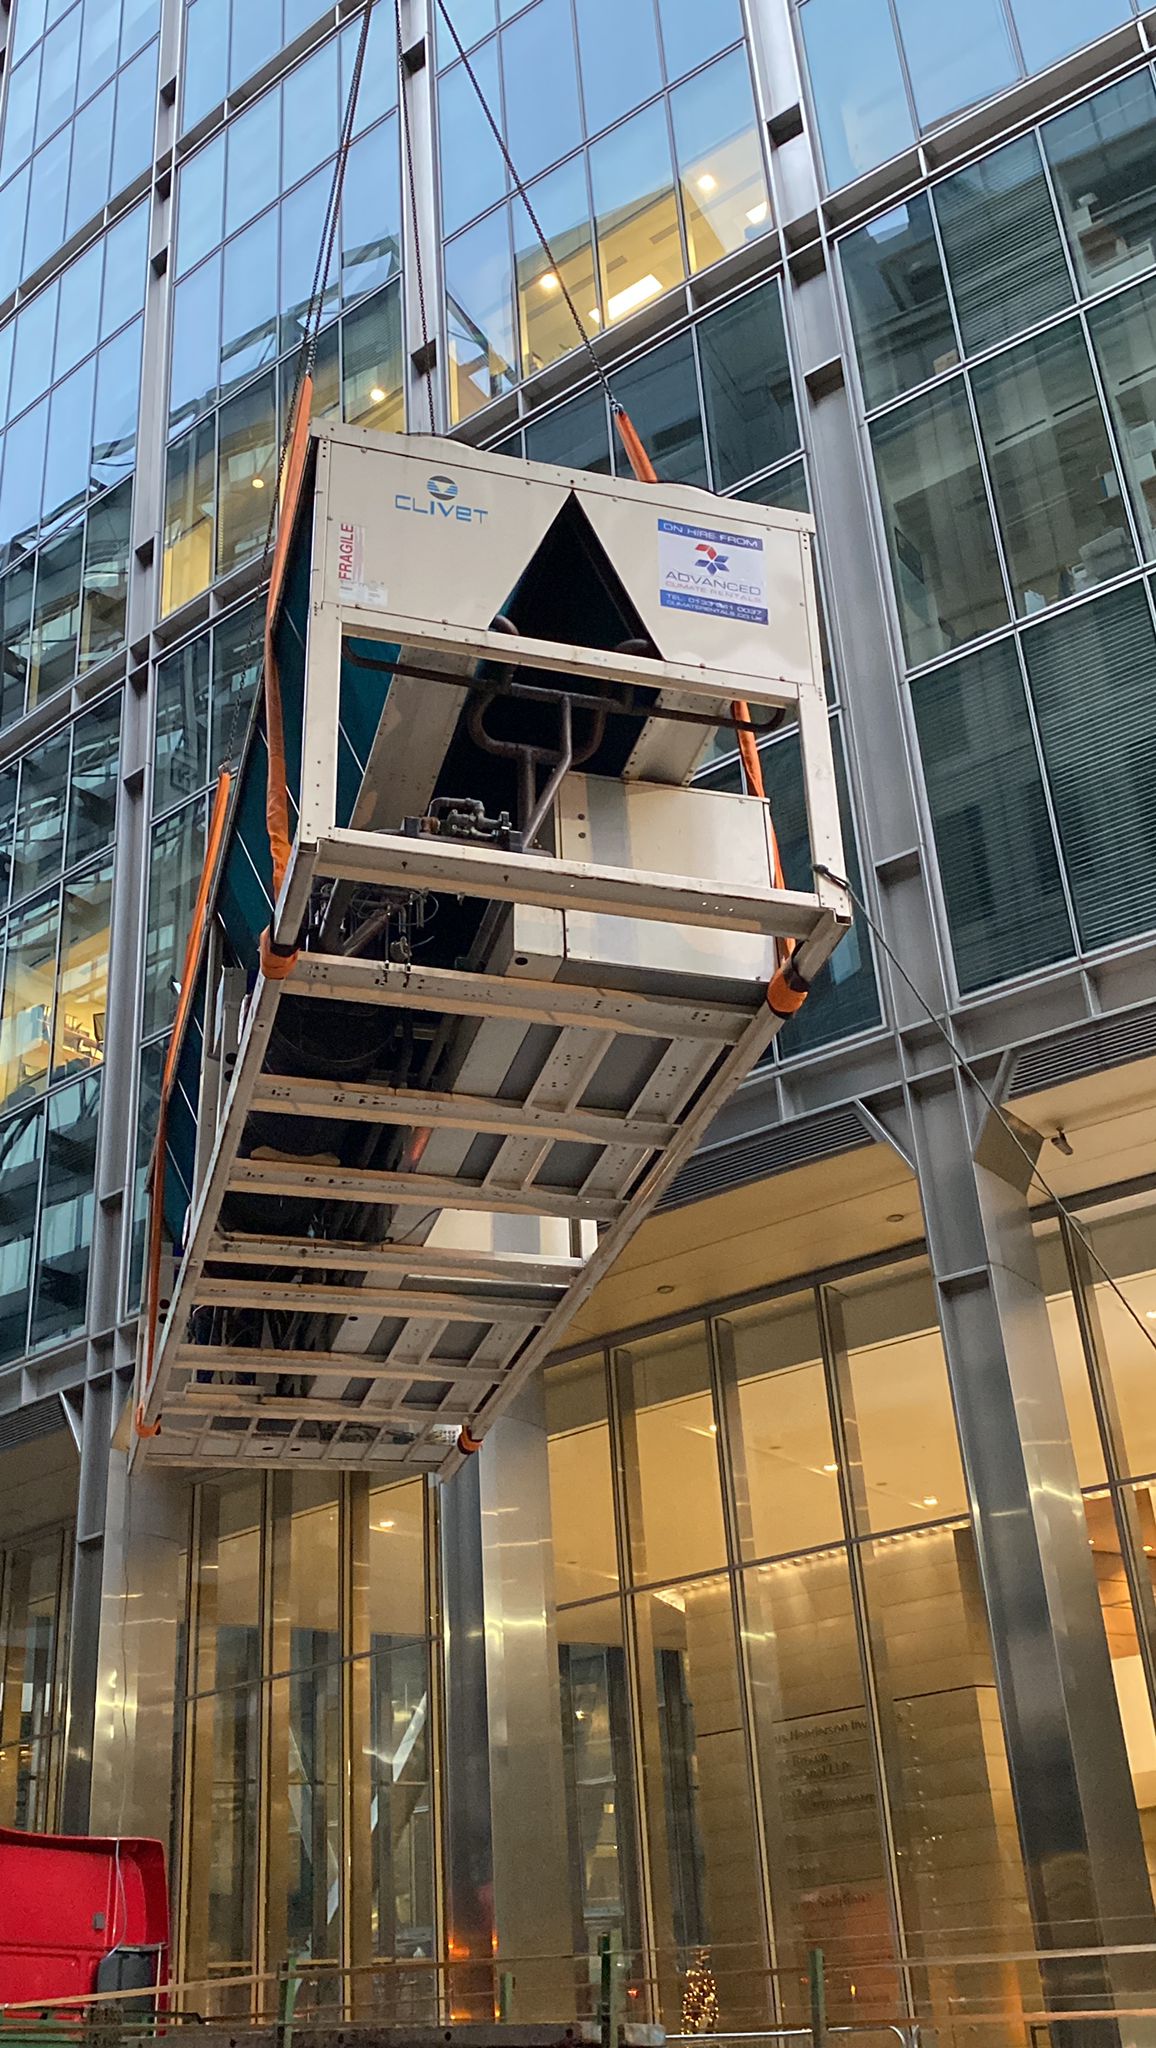 A 1megawatt chiller being lifted in the City of London for temporary chiller hire